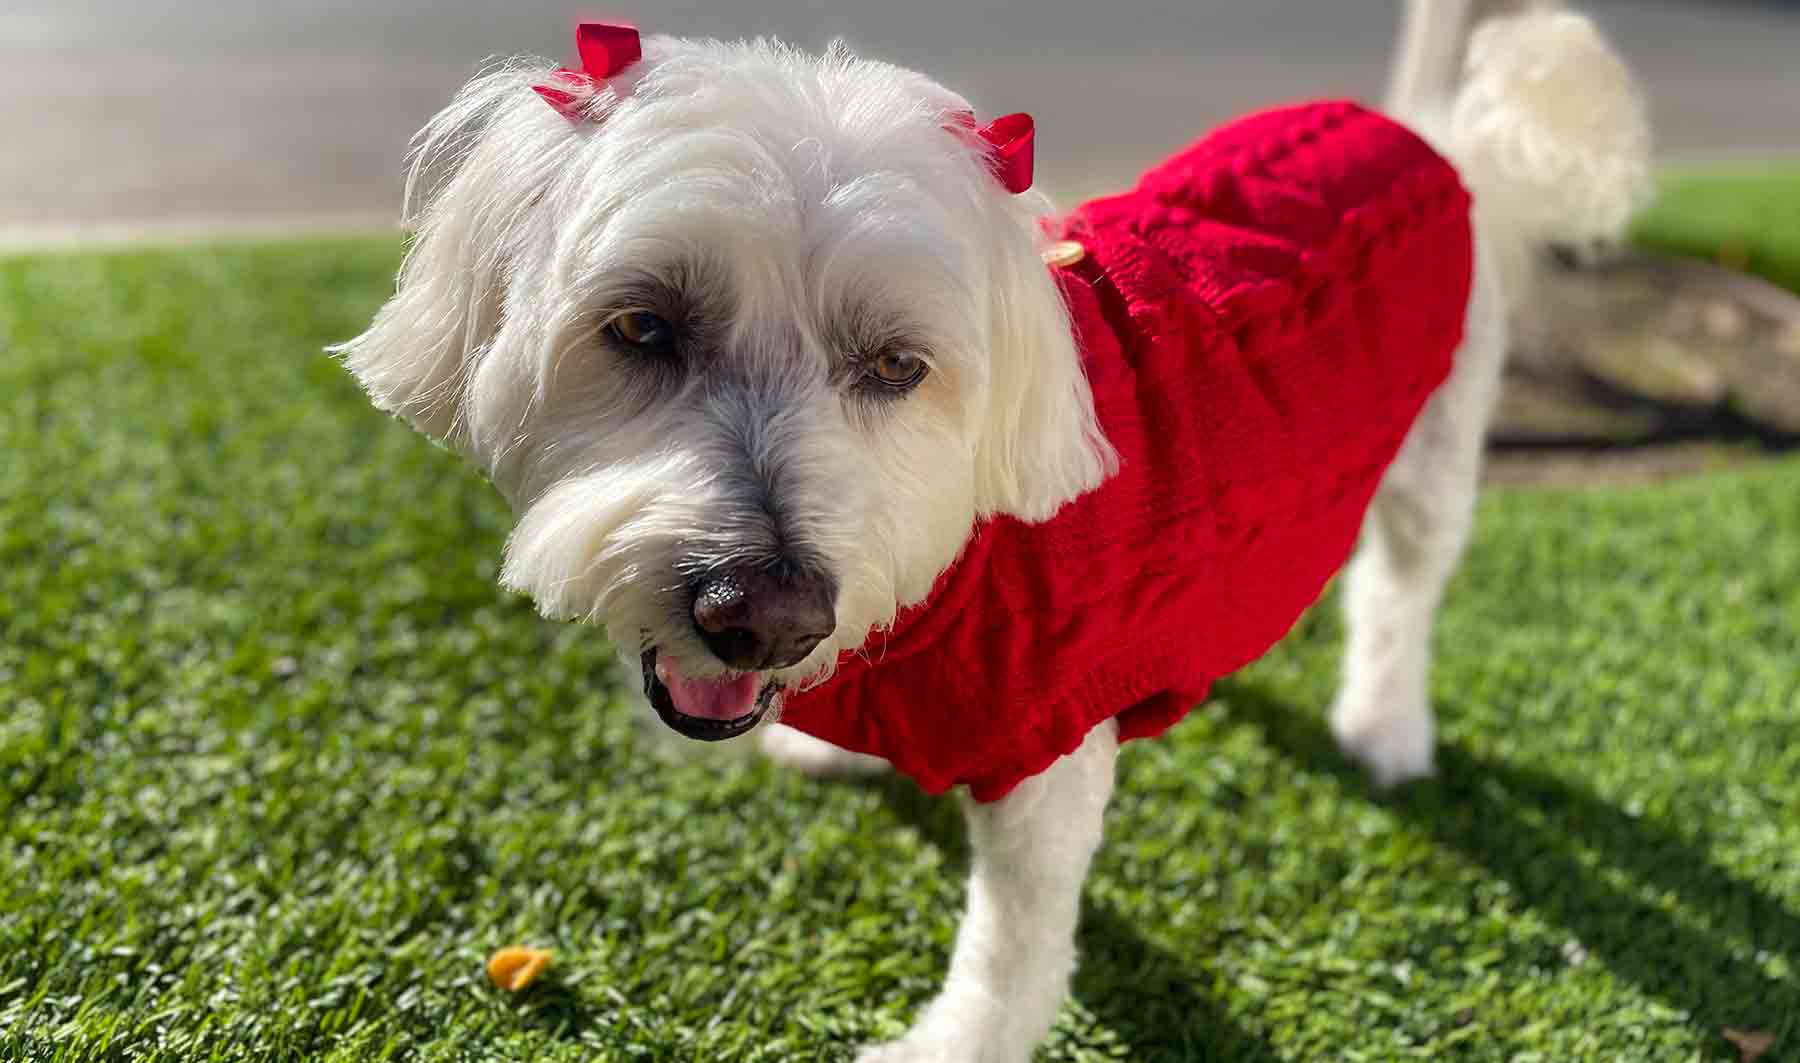 Willow, Bichon Frise, Maltese and Havanese mix, wearing Crimson Button Me Up Dog Sweater from online dog clothing store they made me wear it.